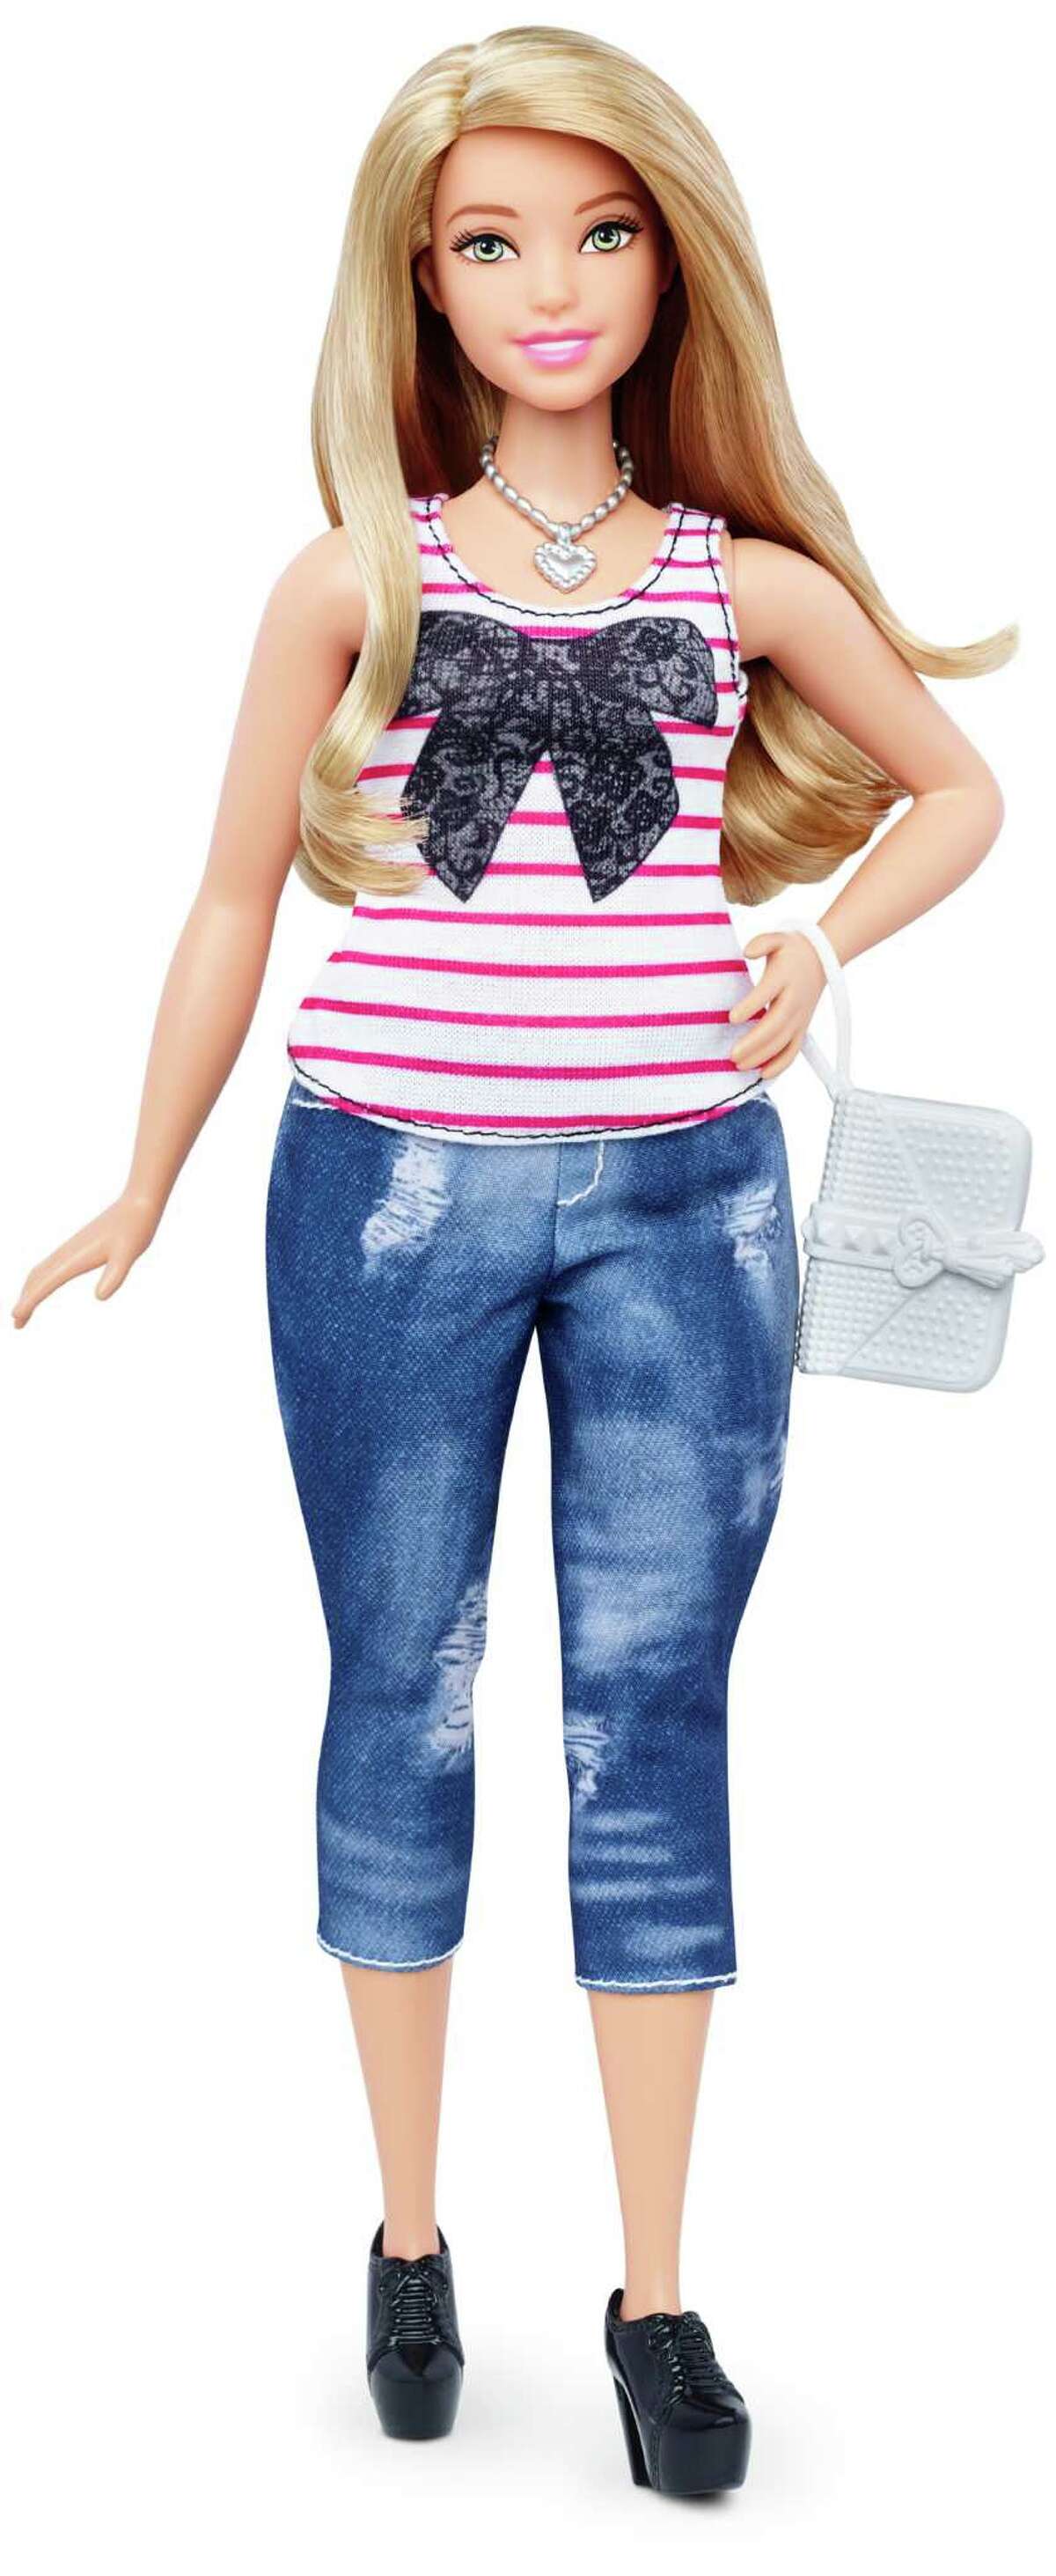 Lucht Zus Afdeling Barbie's new body